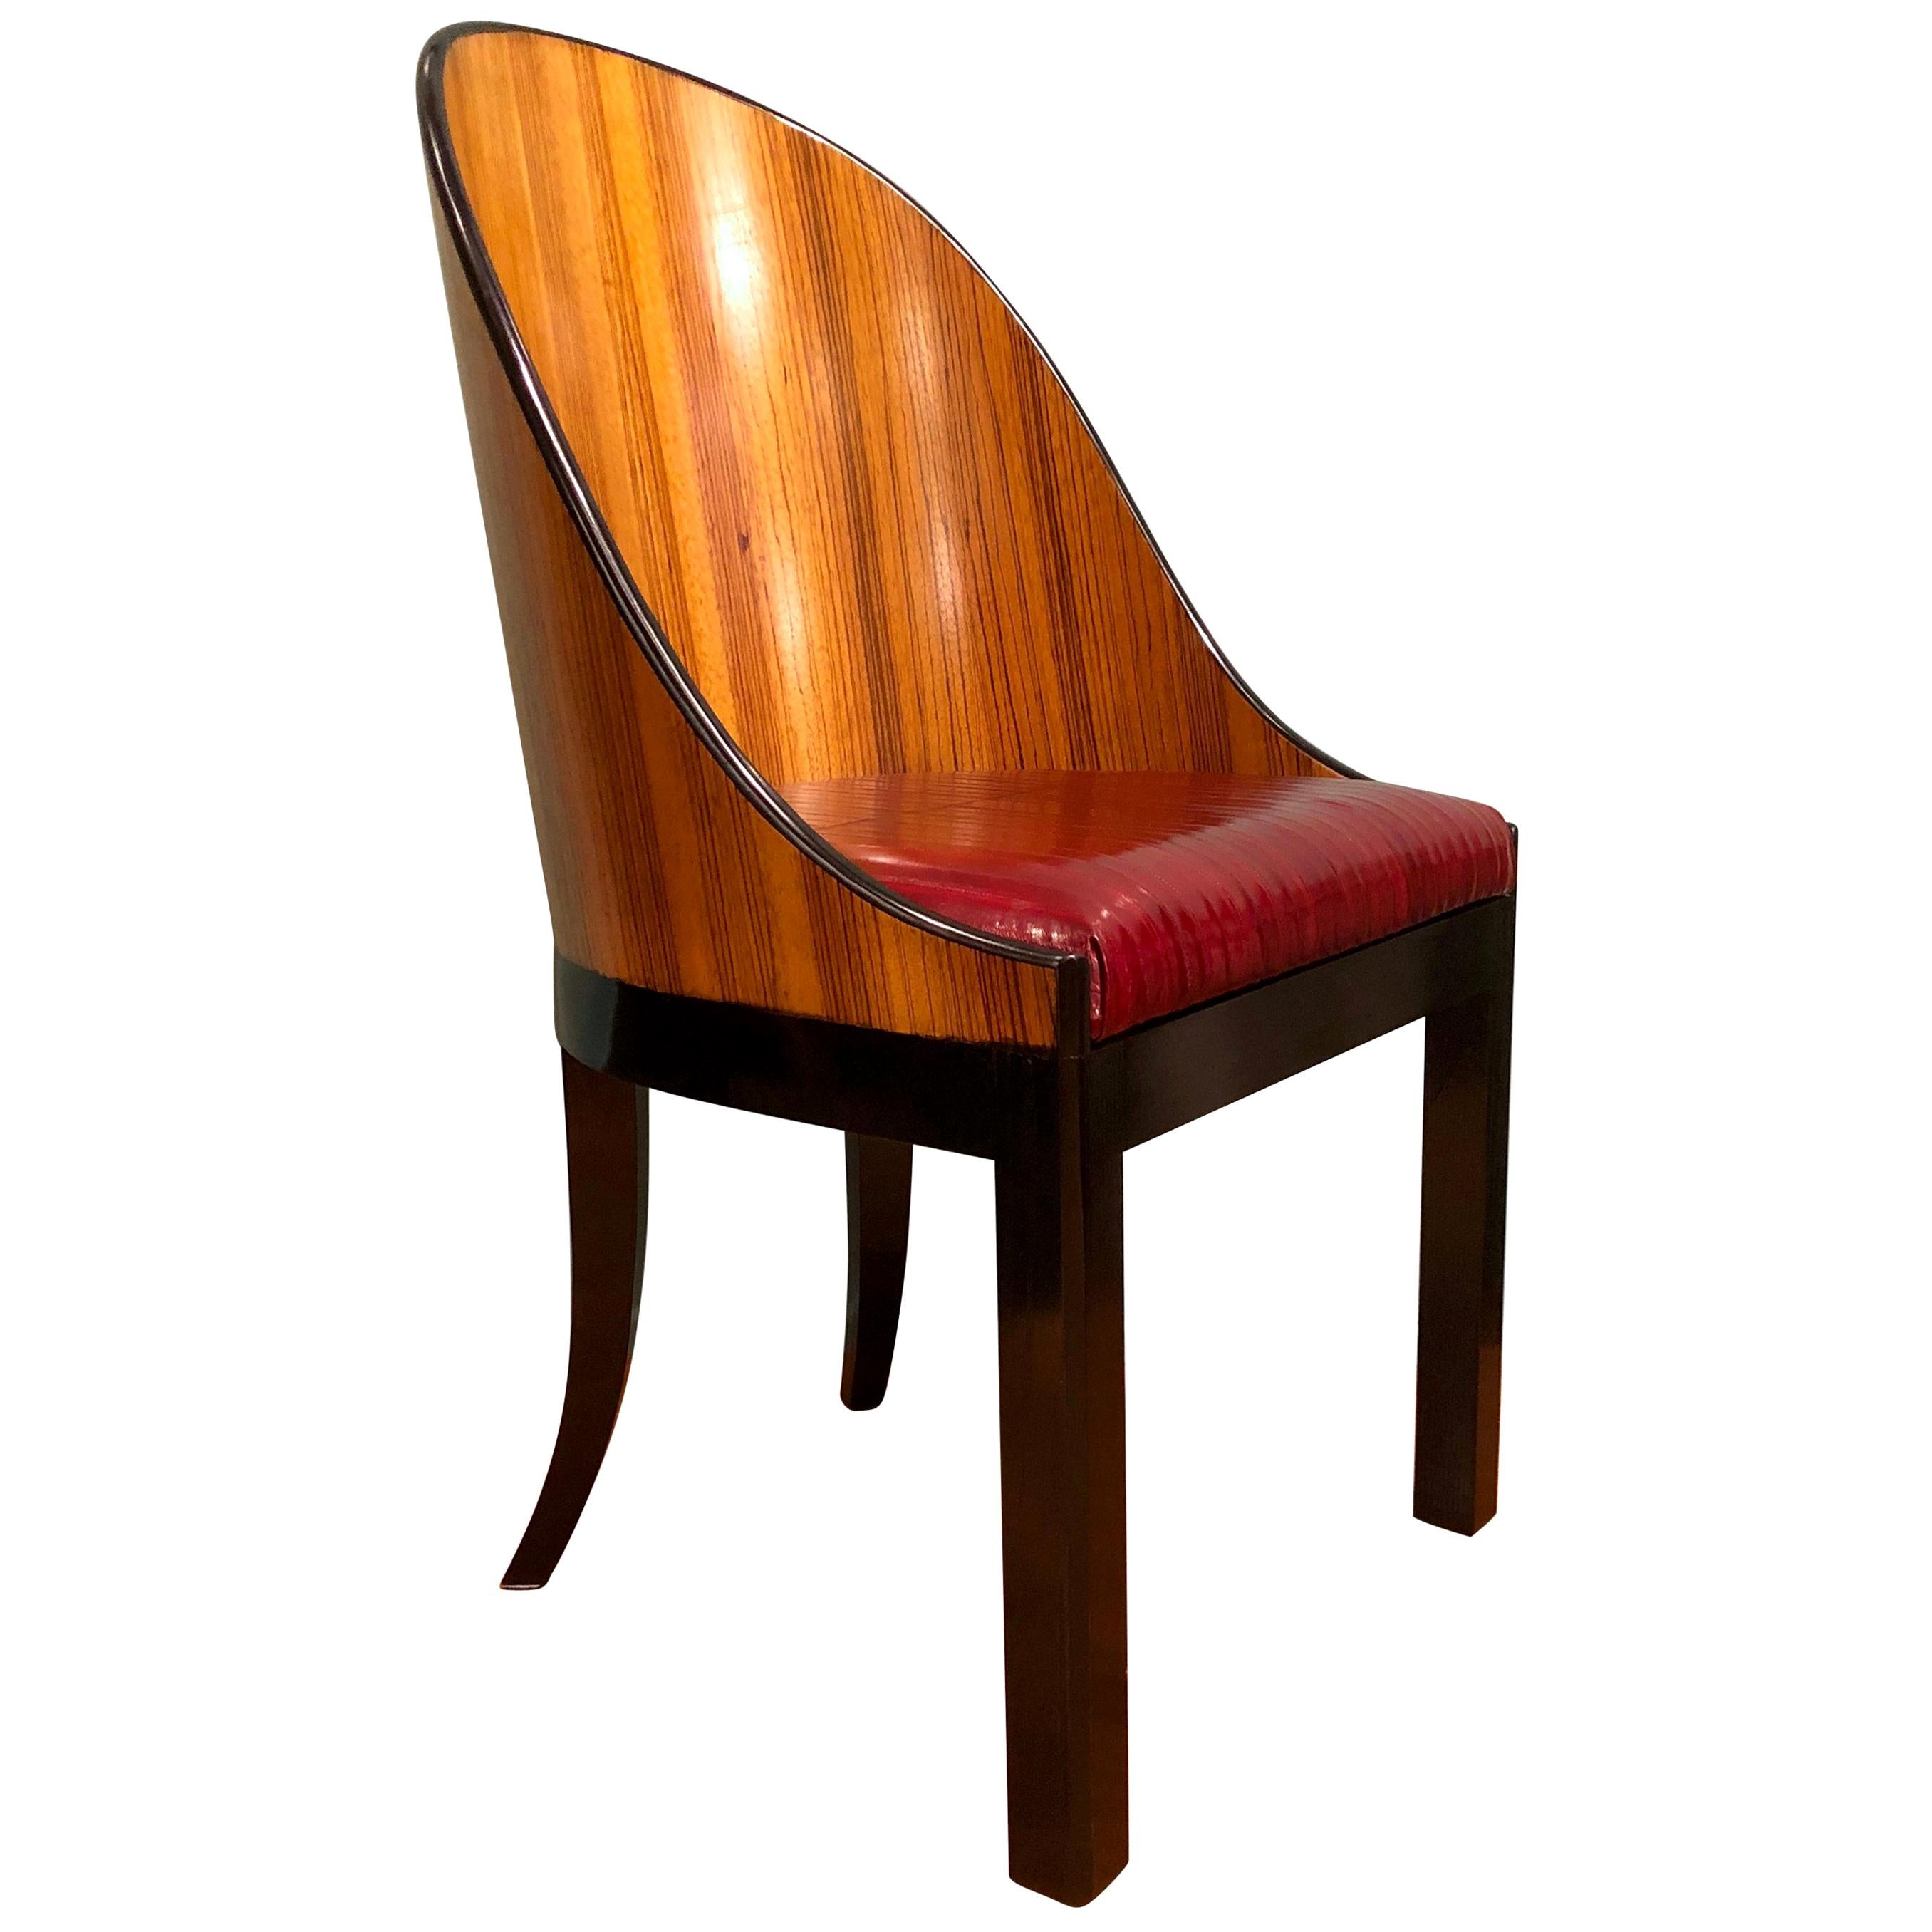 Customizable Zebrano Wood Red Leather Seats and Black Details Saber Legs Chairs